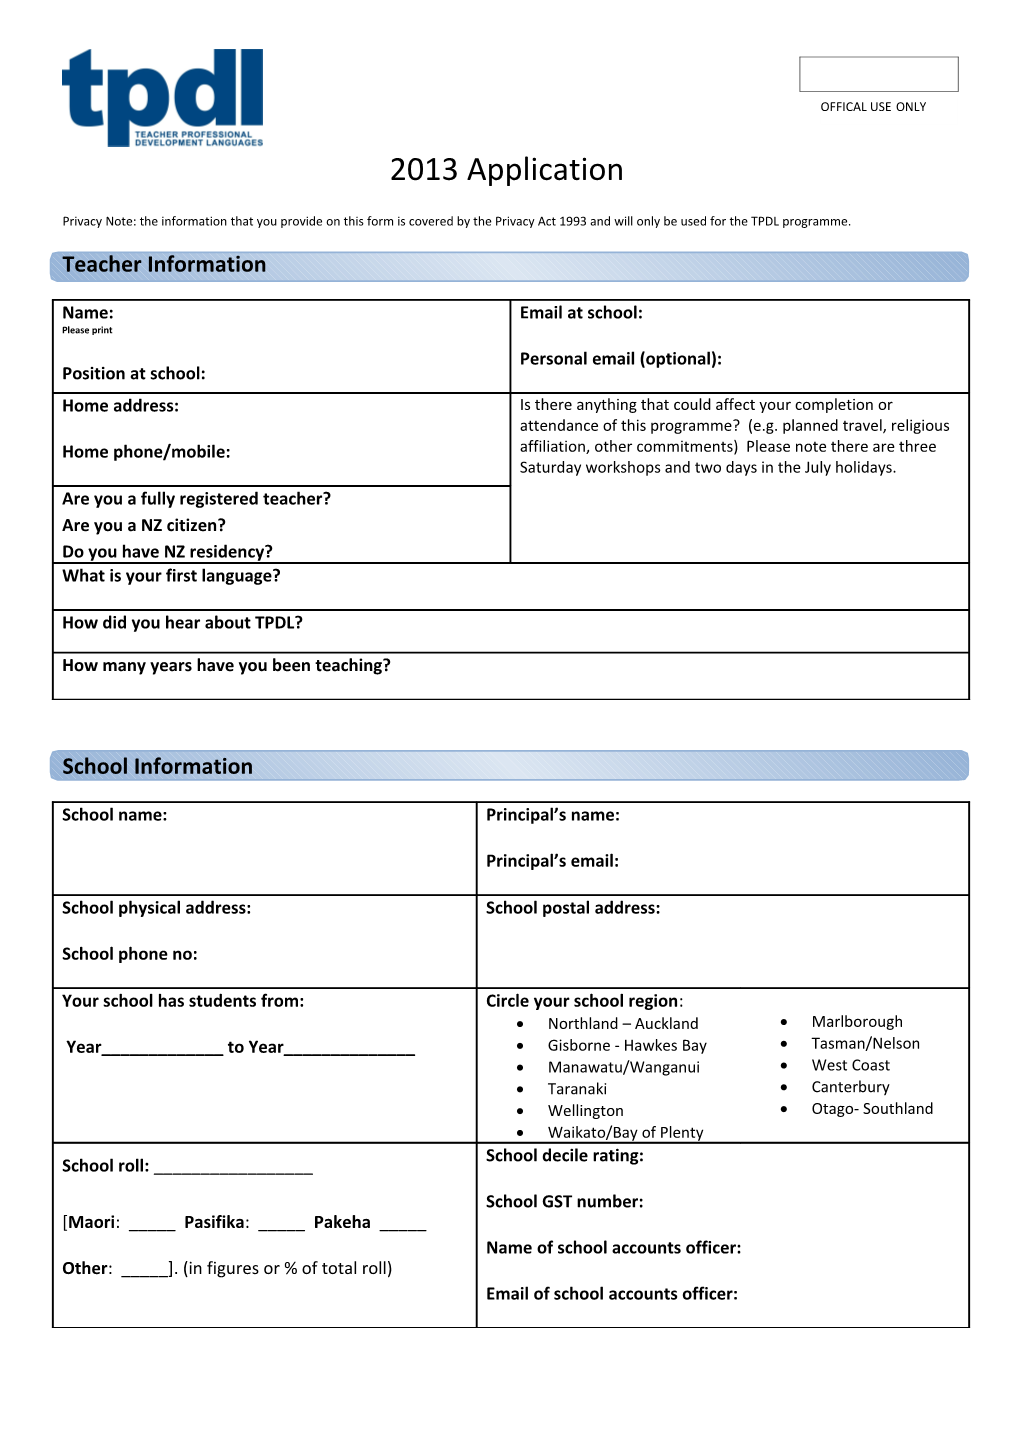 Privacy Note: the Information That You Provide on This Form Is Covered by the Privacy Act